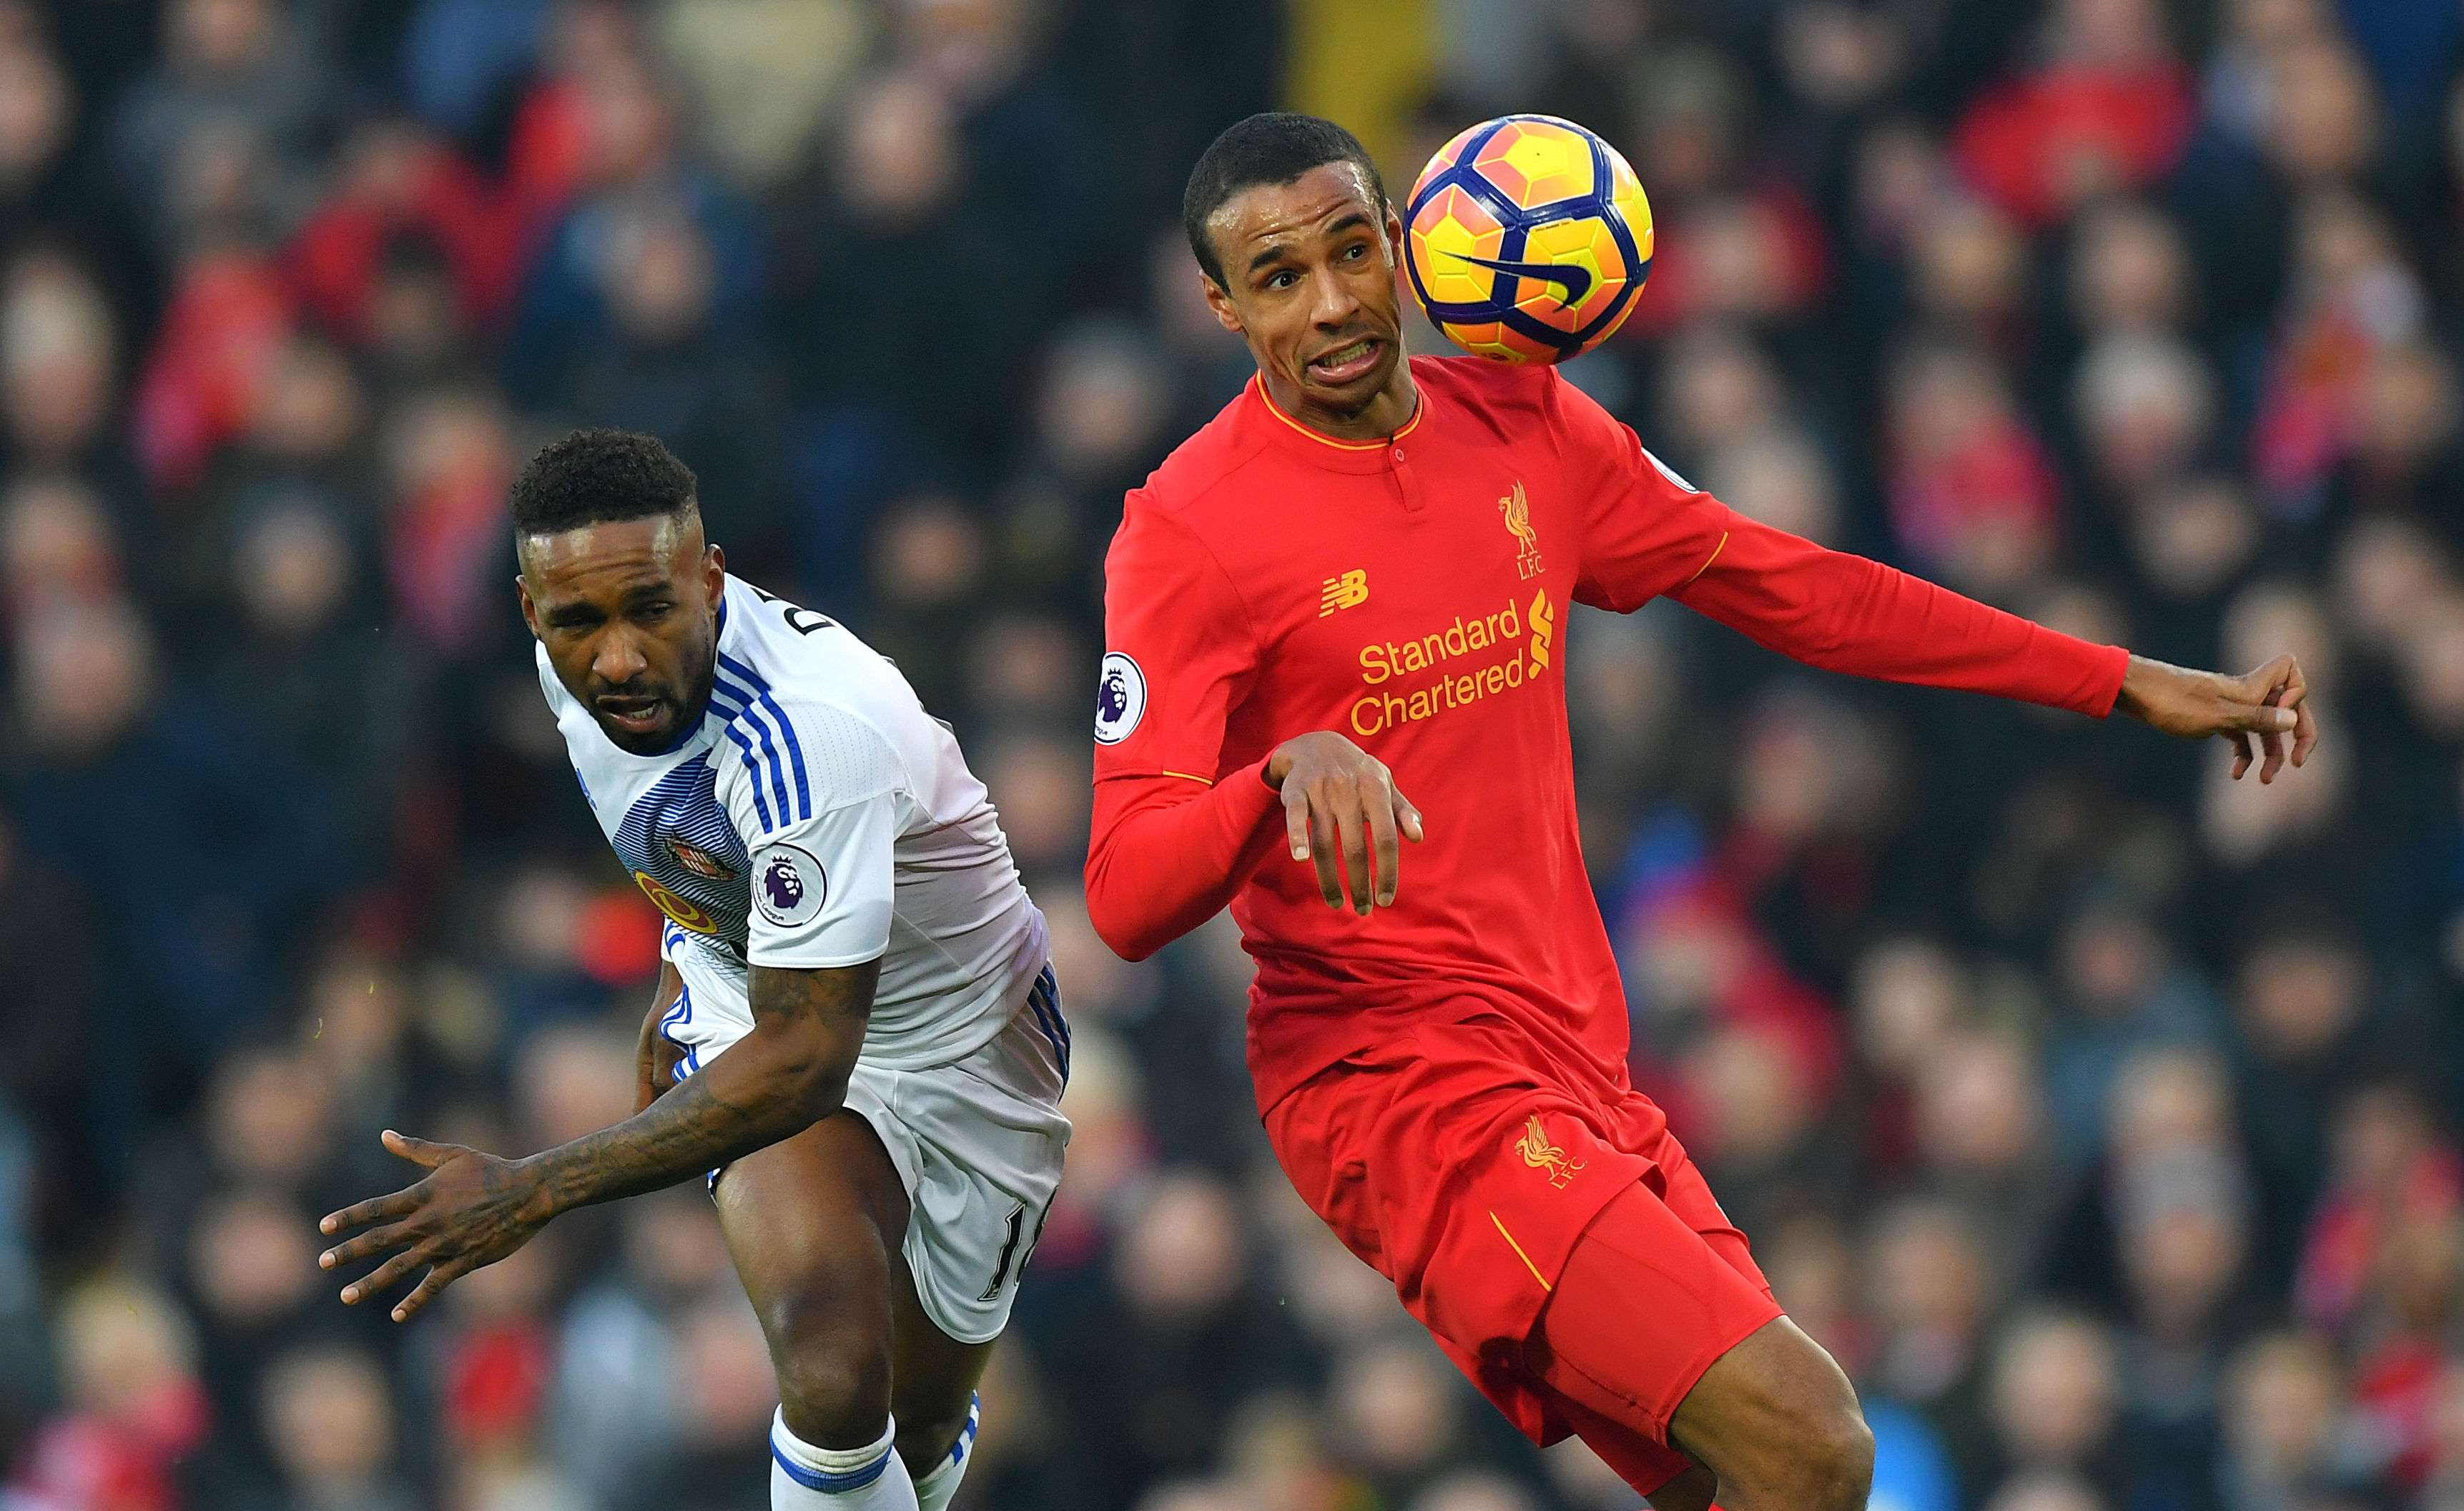 Liverpool’s Joel Matip has been crucial to their strong form, this season. Photo: AP